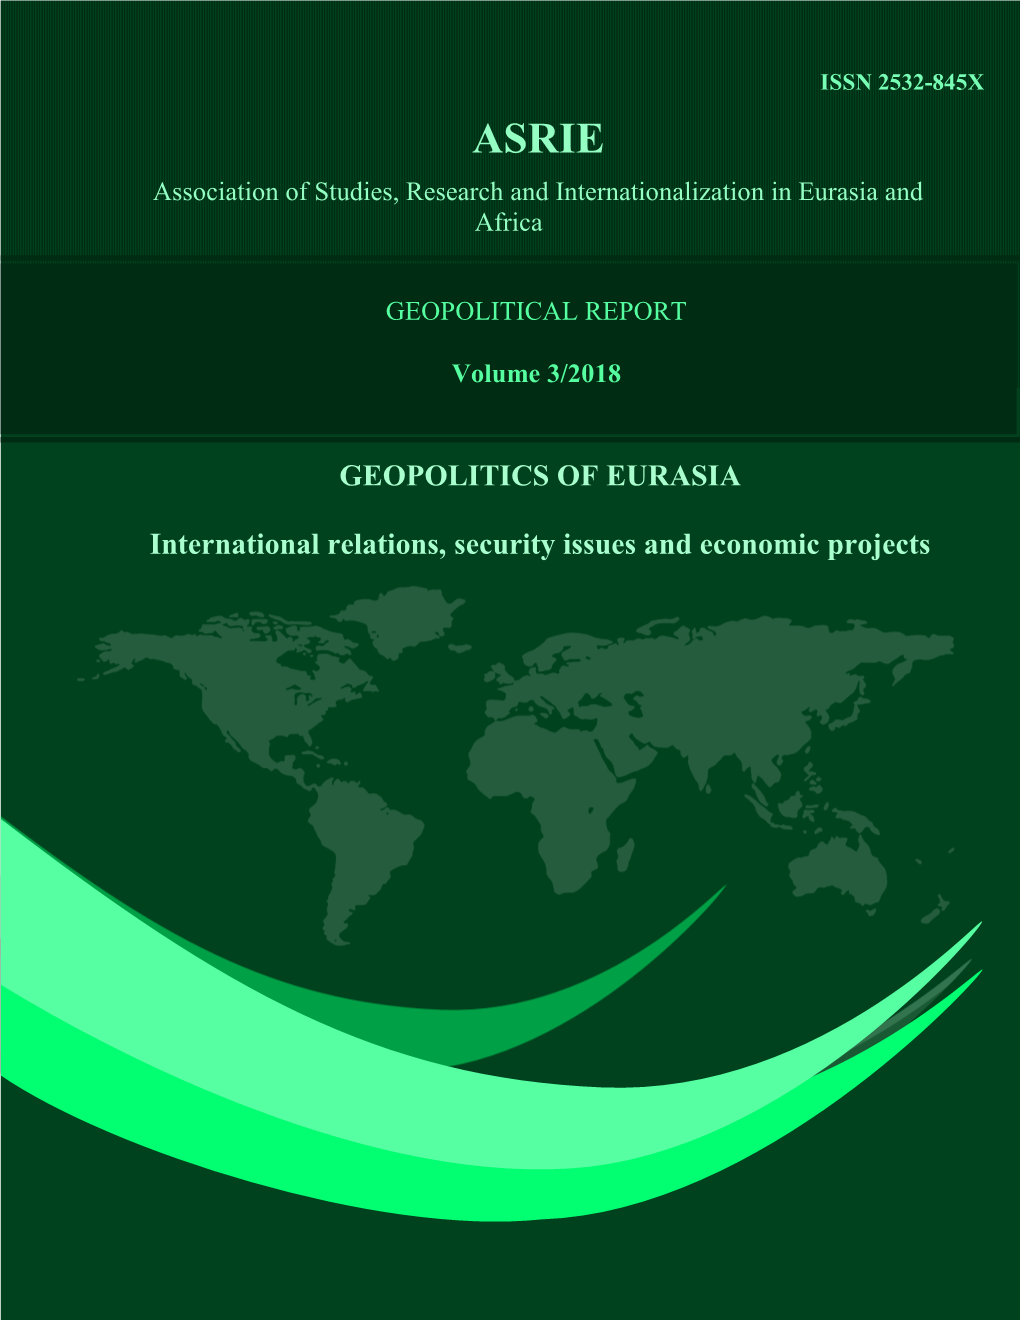 Association of Studies, Research and Internationalization in Eurasia and Africa